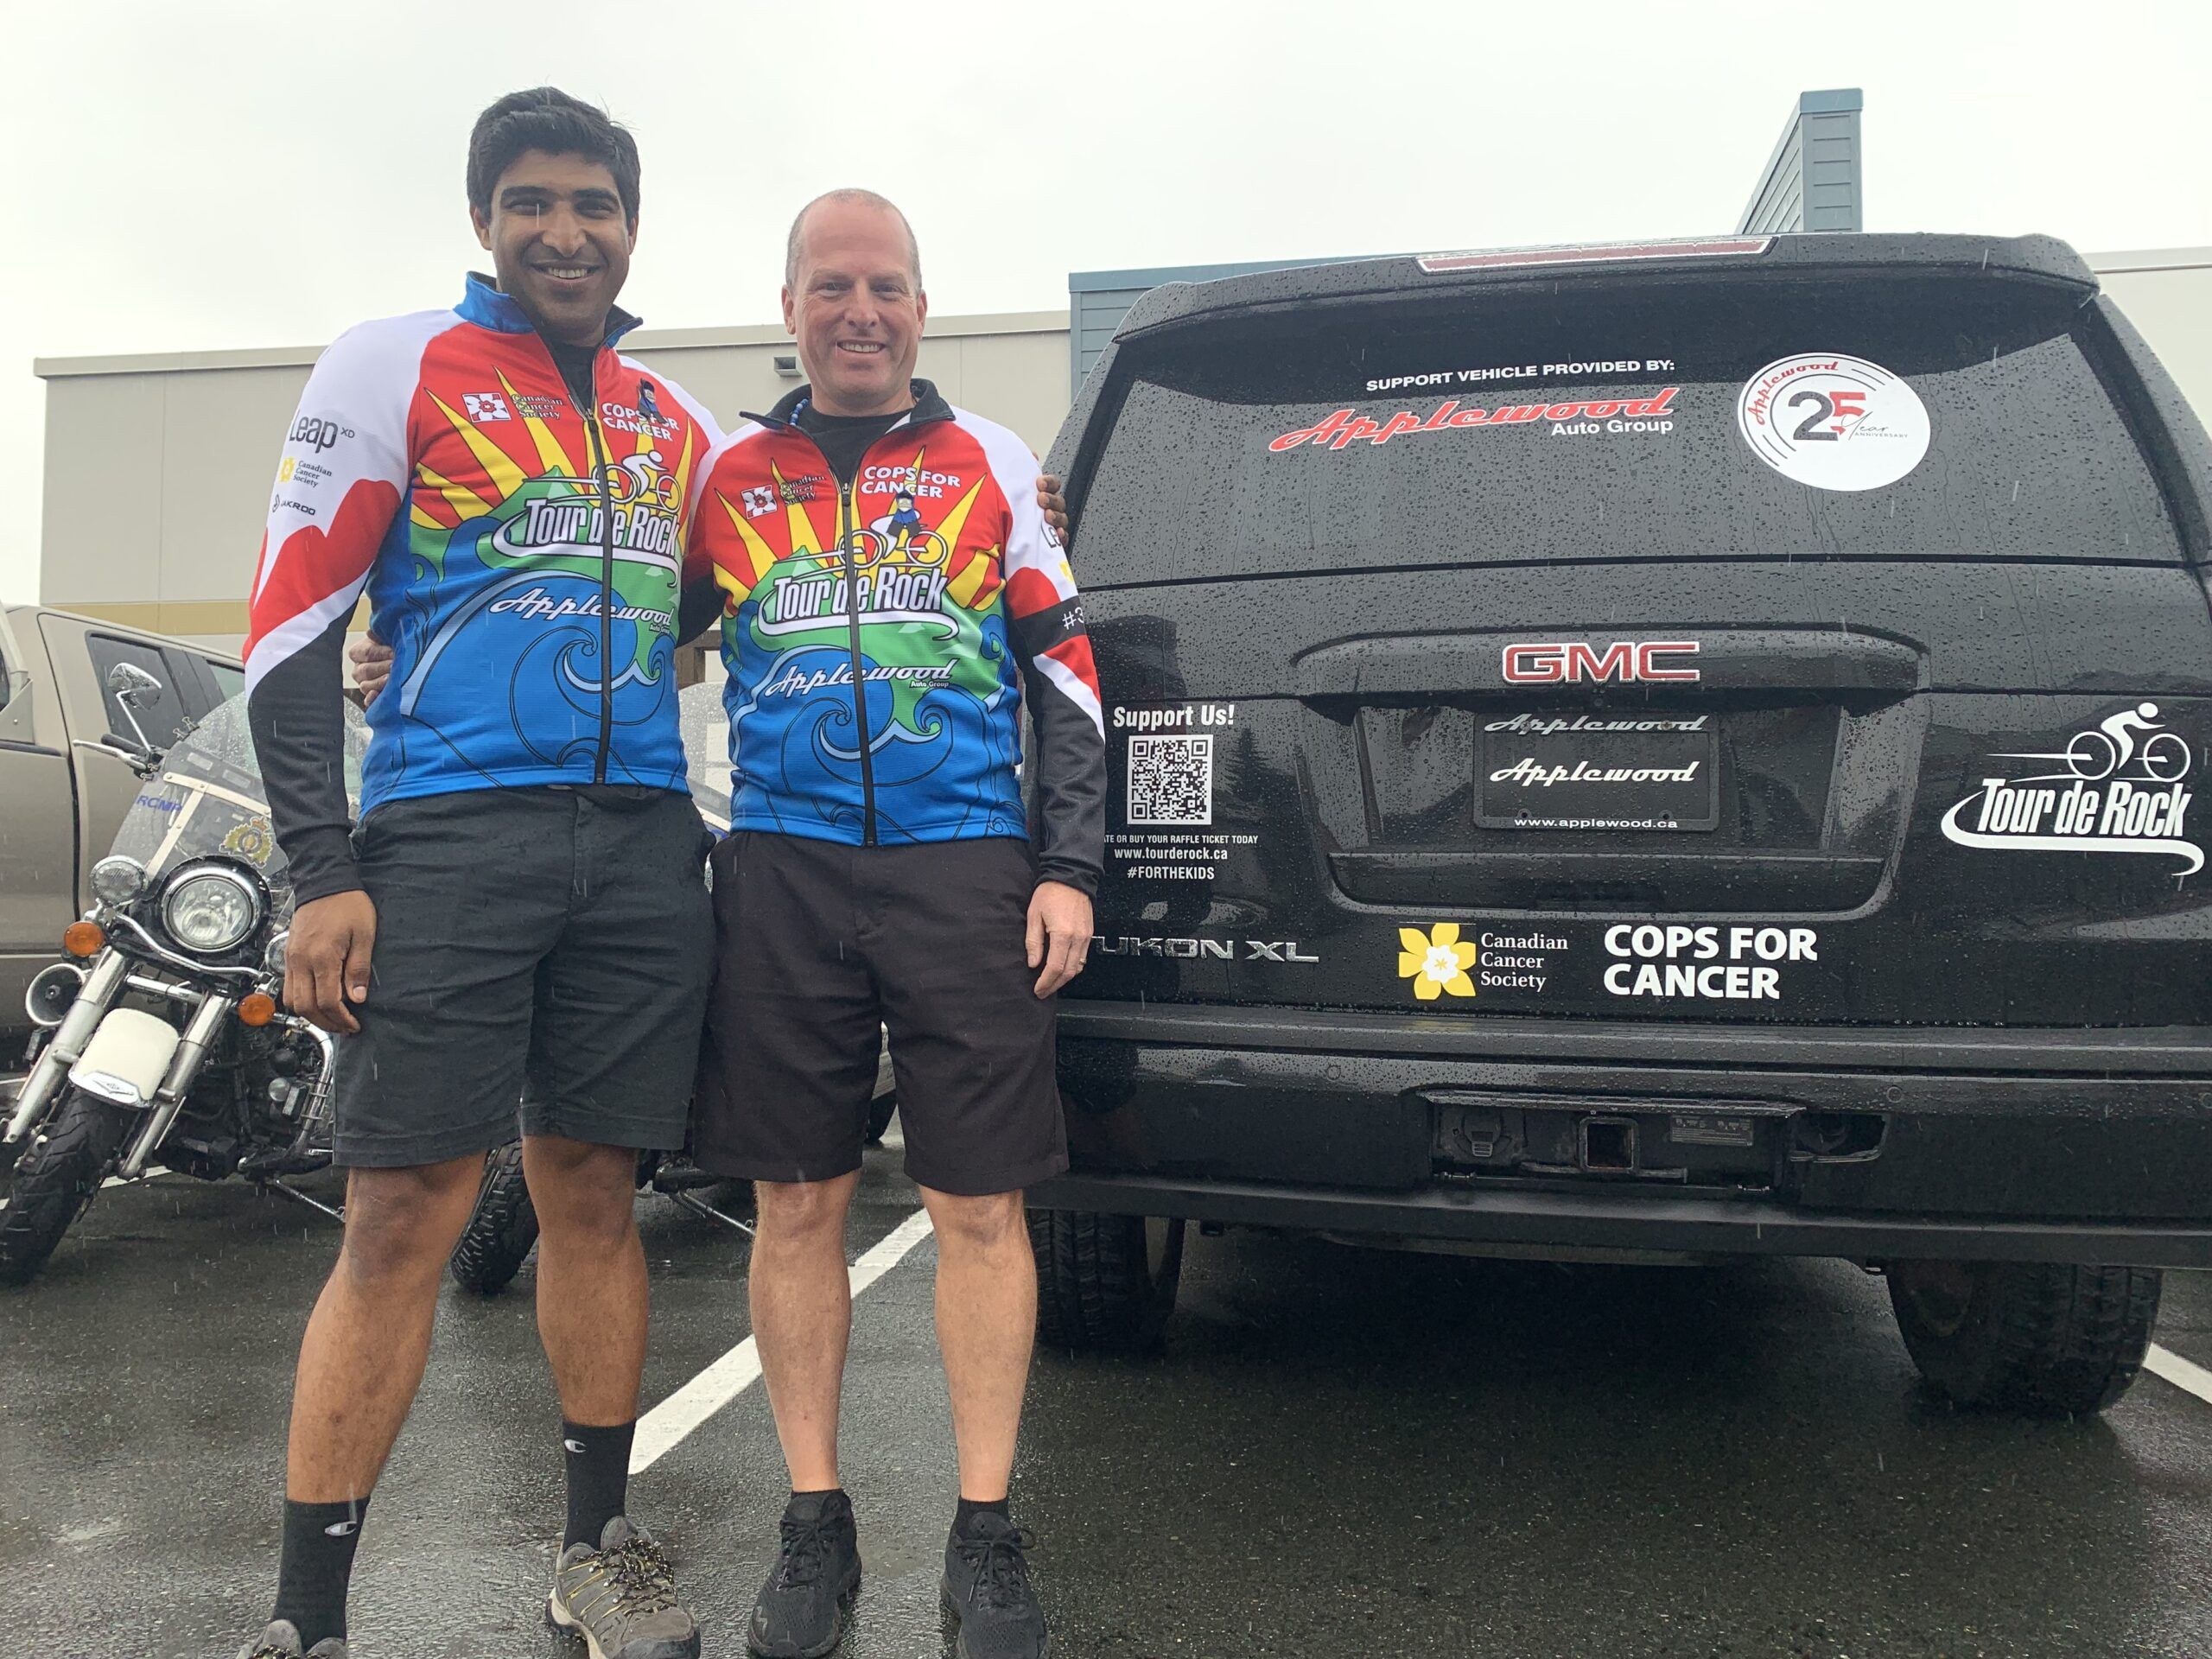 Tour de Rock riders brave bad weather to start island-wide journey - My ...